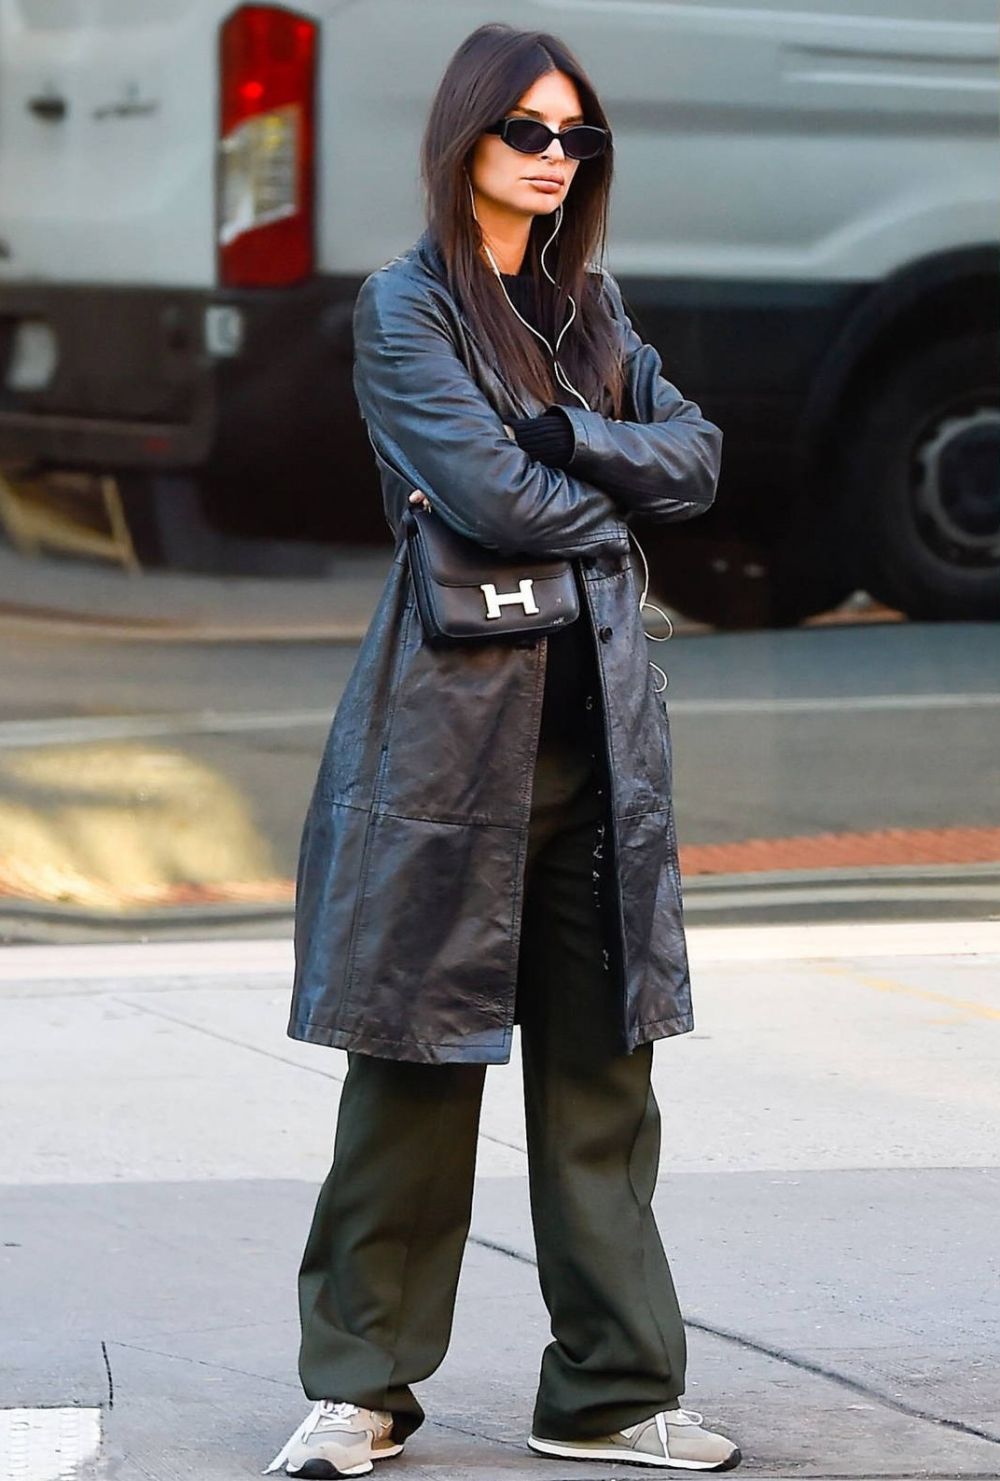 Emily Ratajkowski in New York City wearing Leather Trench Coat, Hermes Constance Bag, Green Pants, New Balance 574 Sneakers